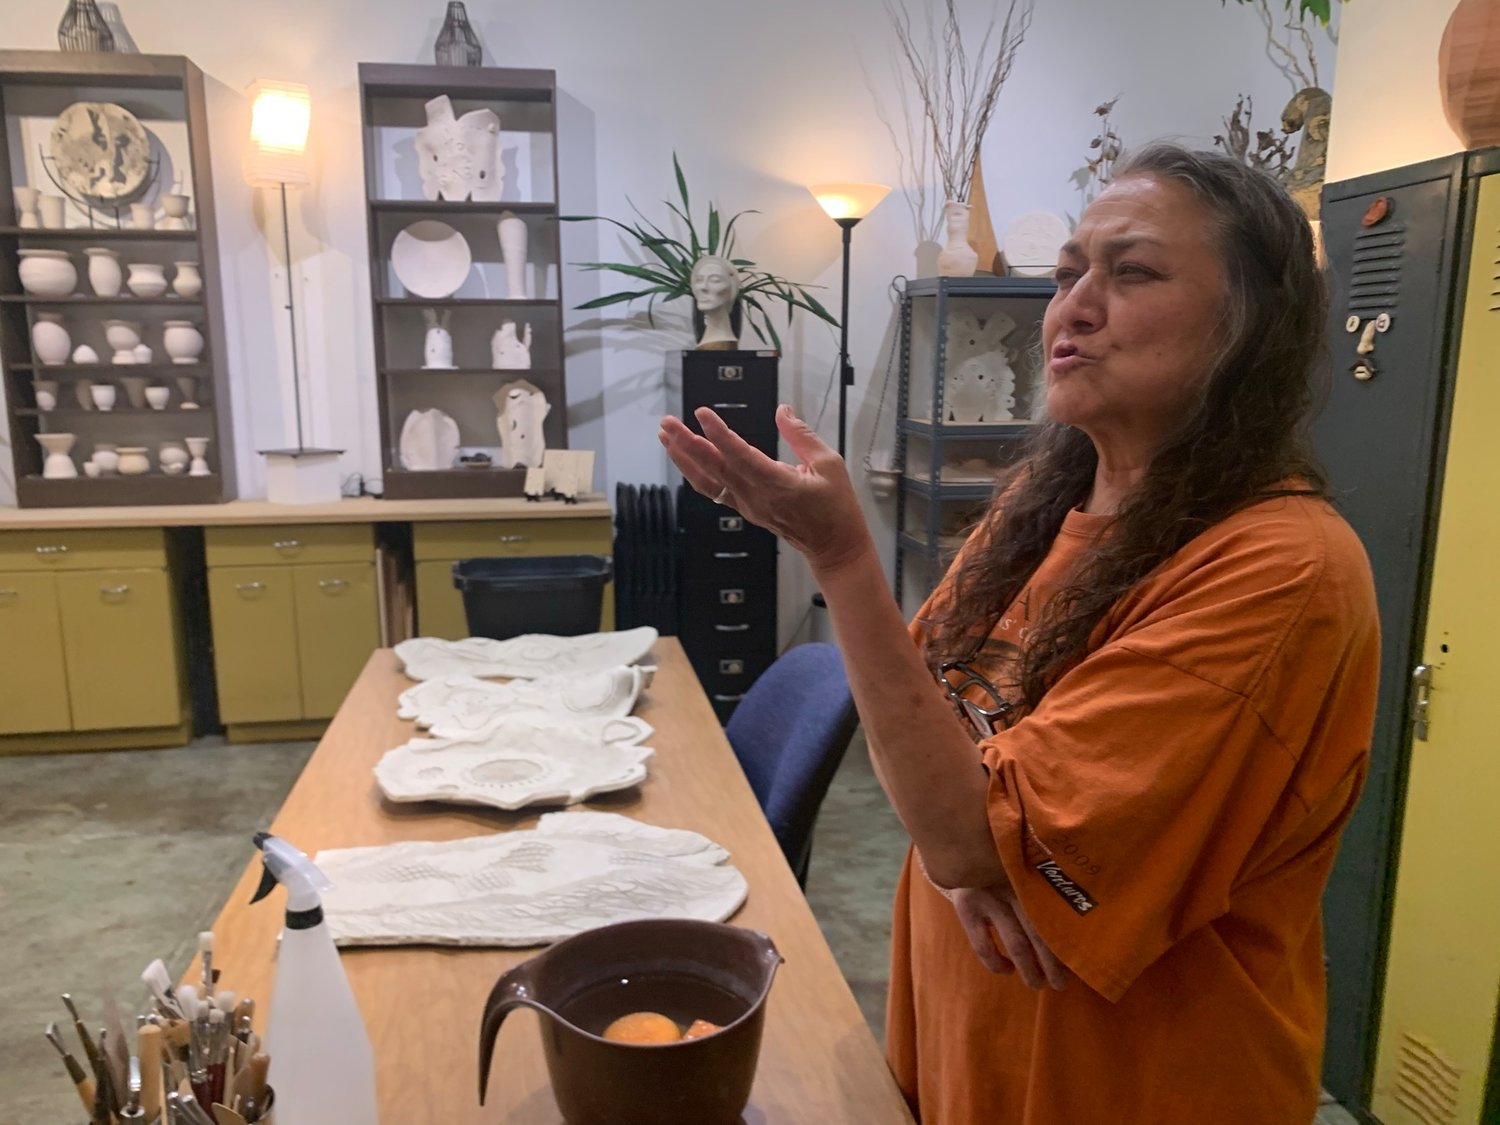 Russo talks about her passion for creating her clay sculpture as part of the connection between the past and the future.